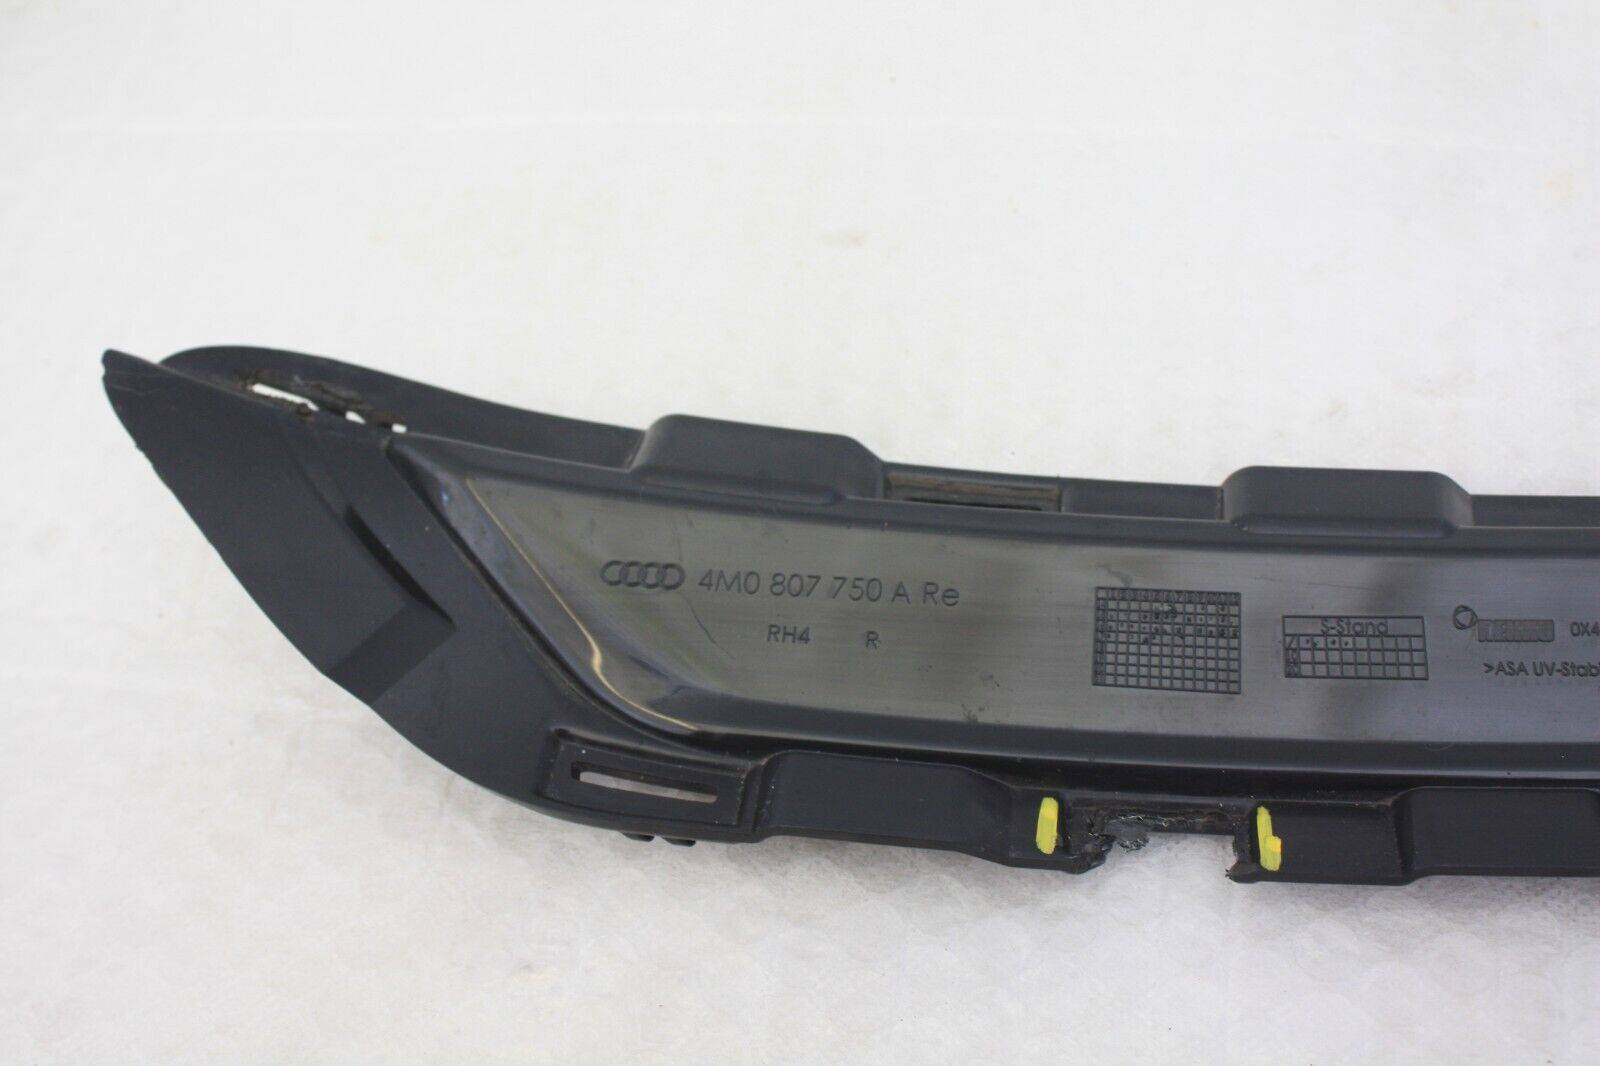 Audi-Q7-Front-Right-End-Cap-Cover-2015-TO-2019-4M0807750A-Genuine-176318342447-12